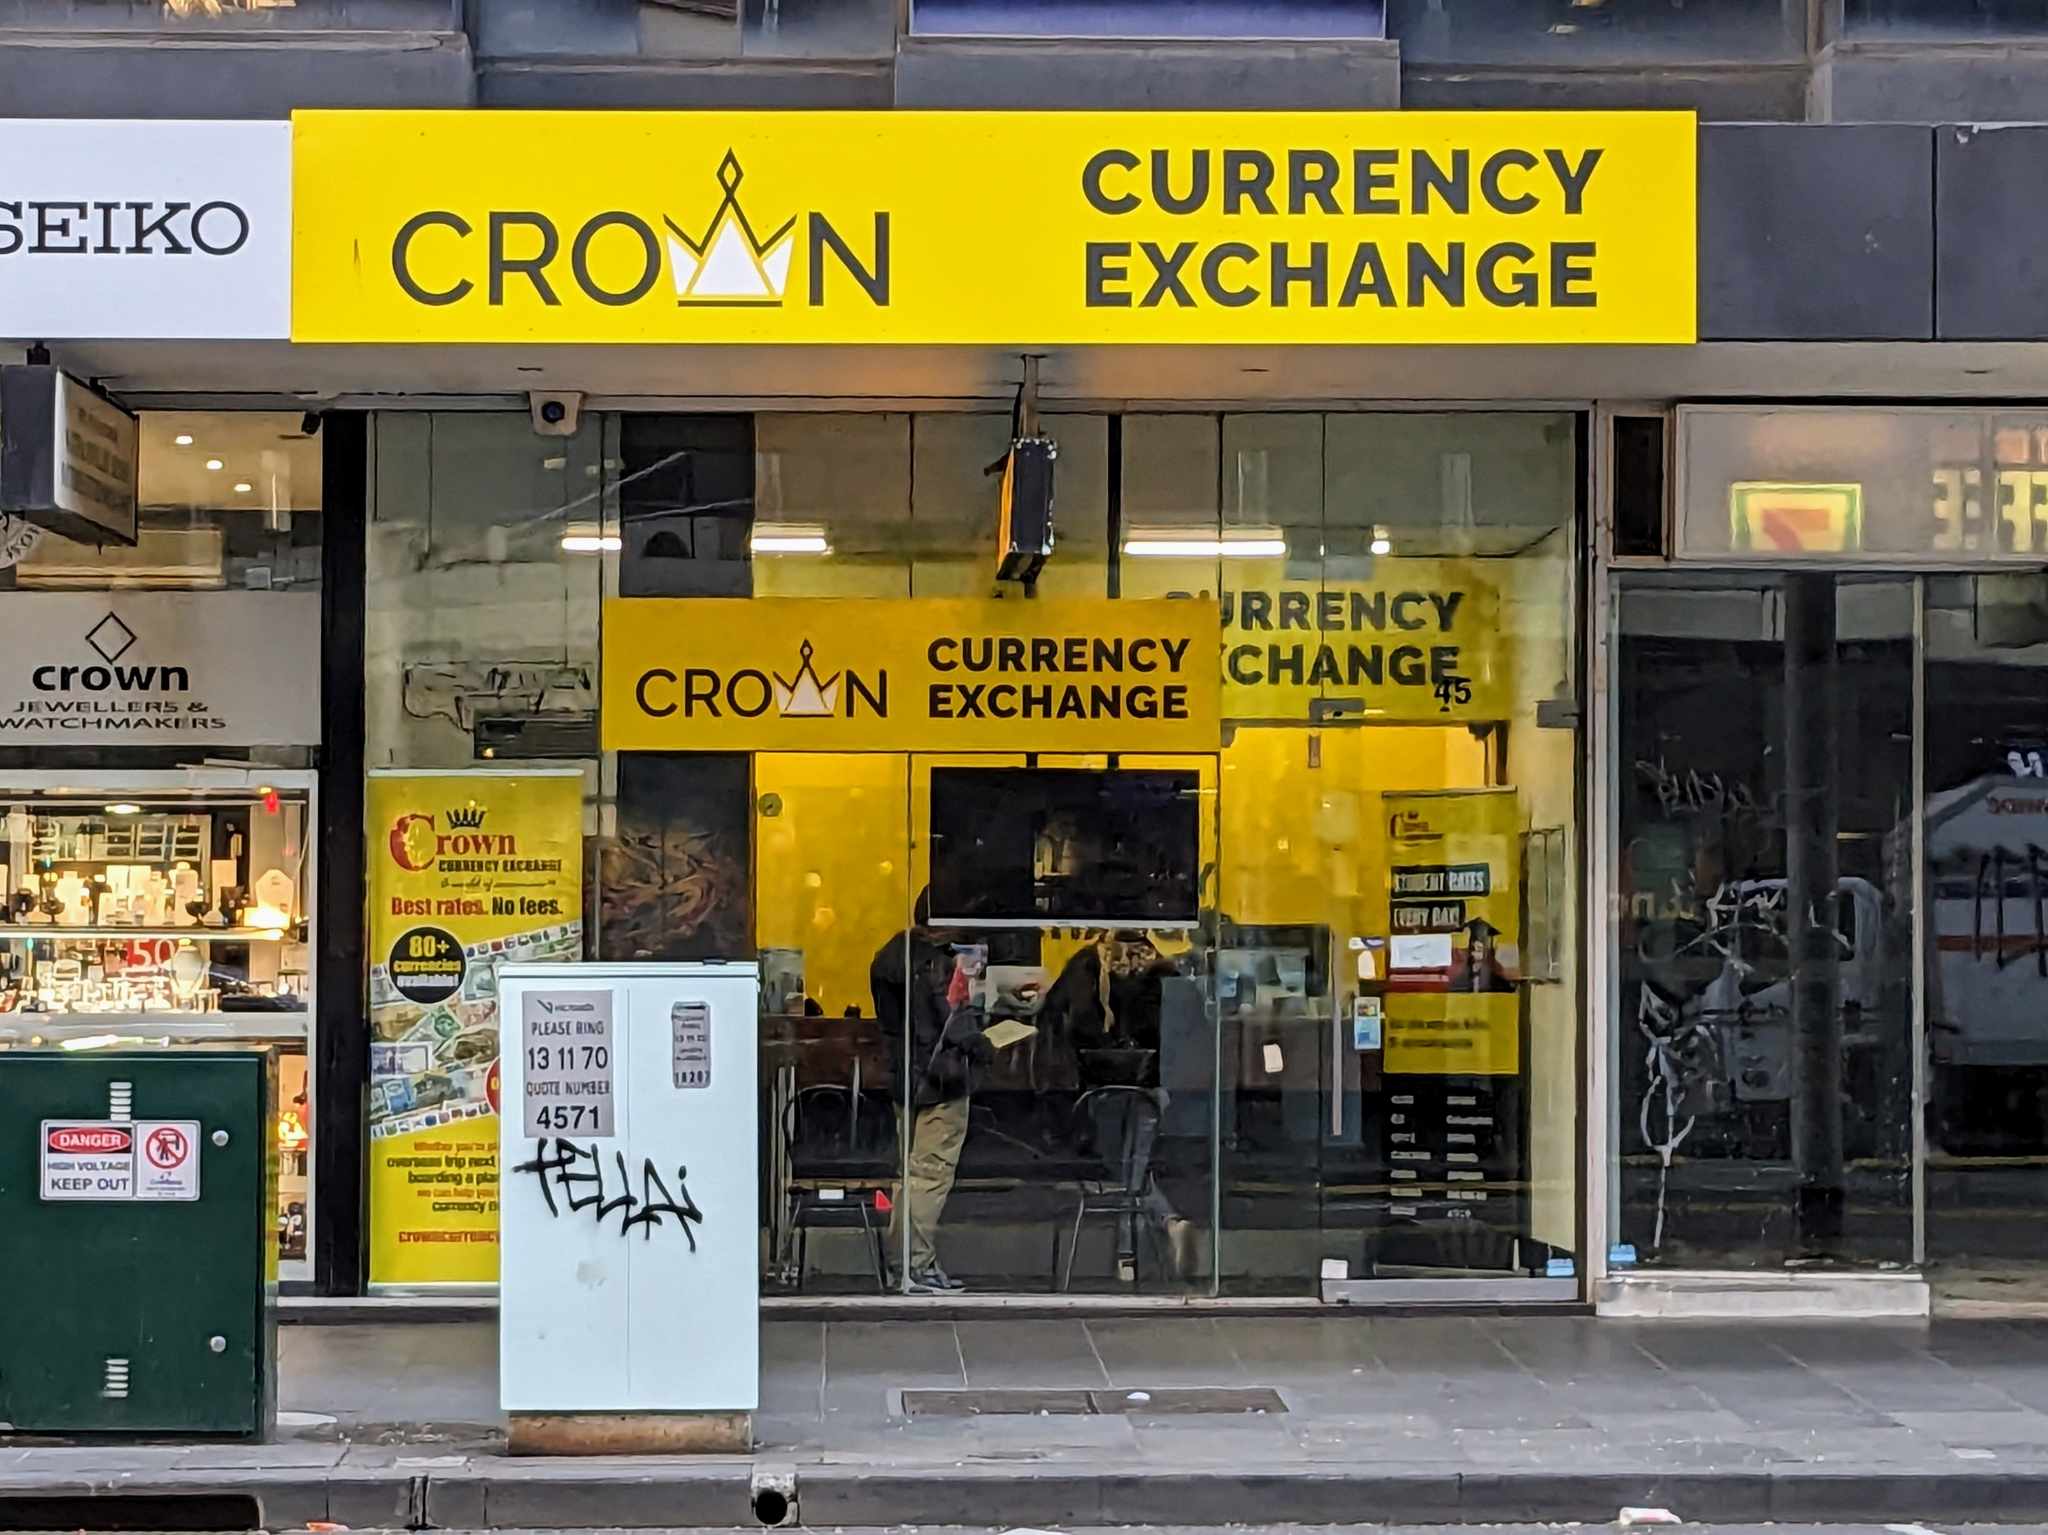 Crown Currency Melbourne